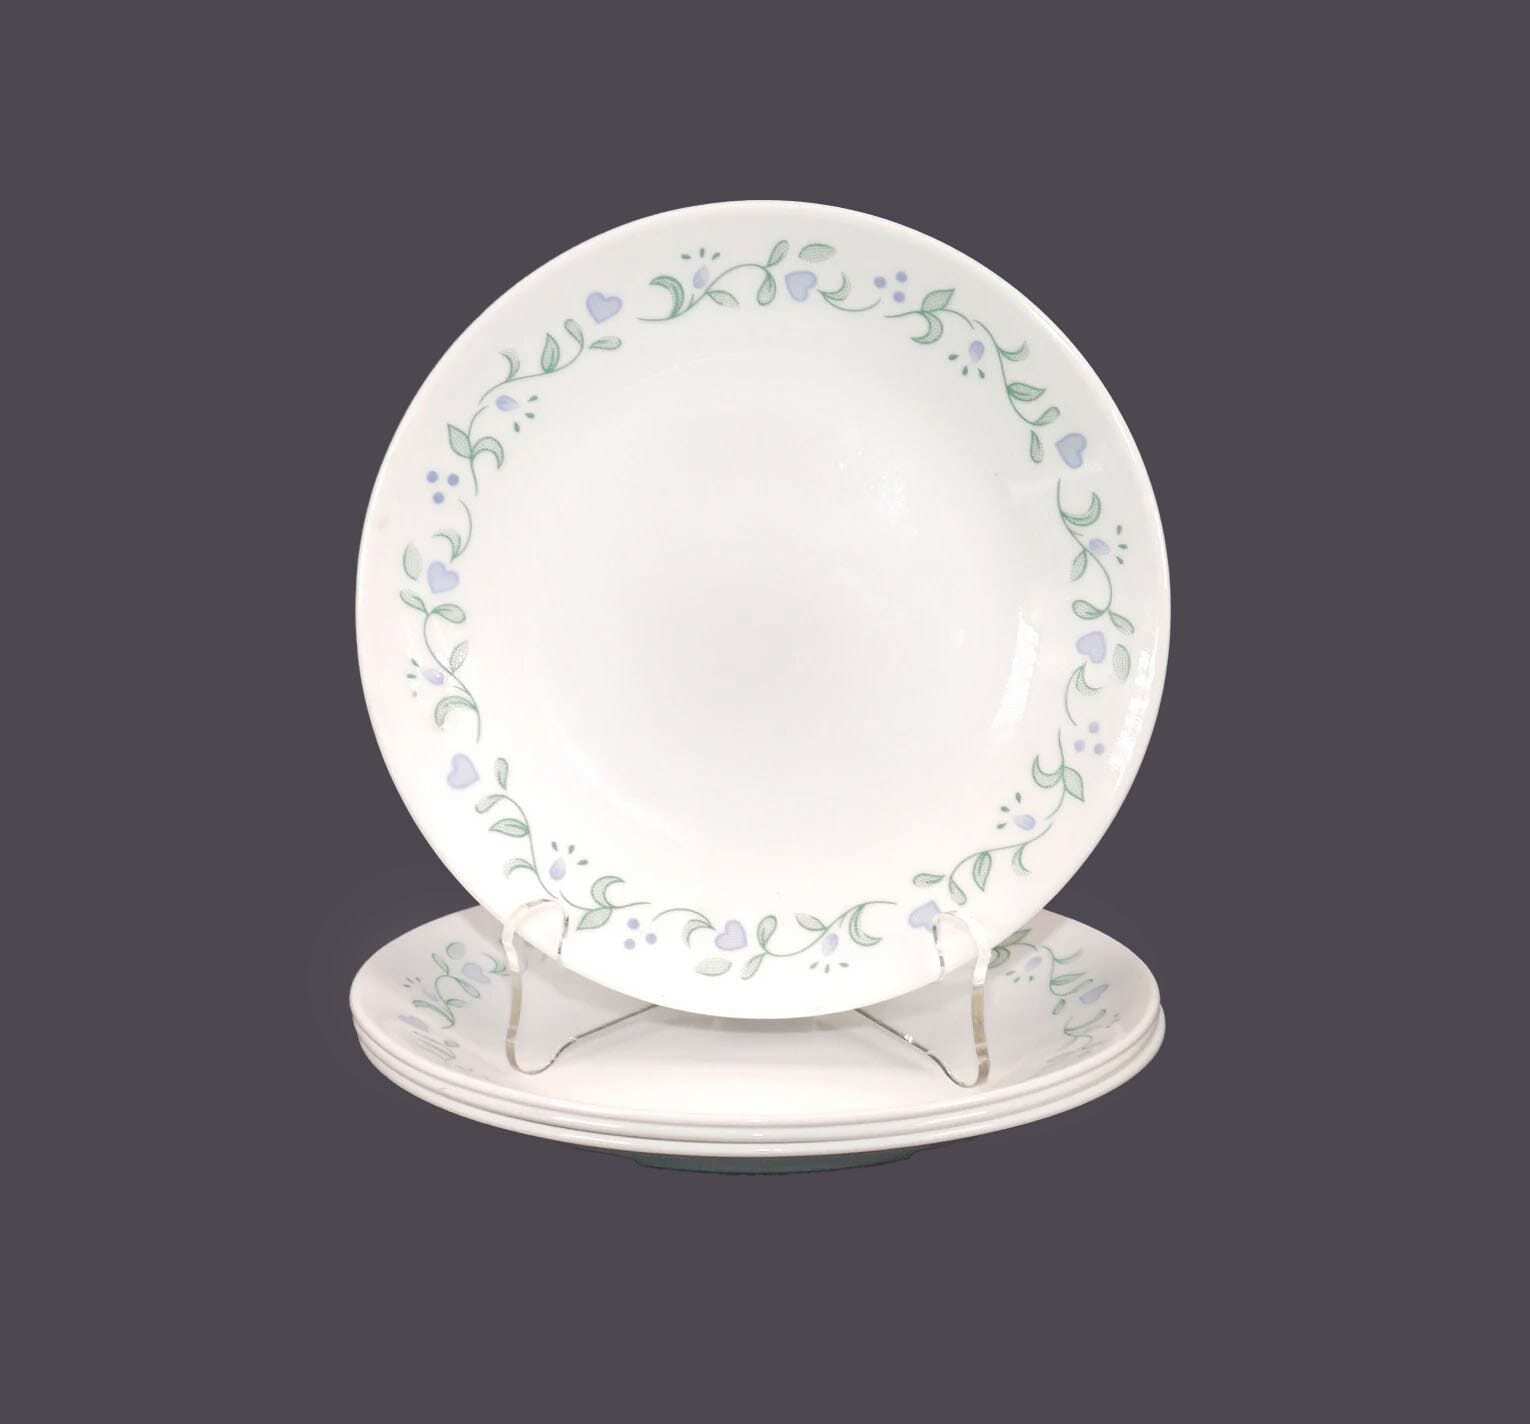 Corelle Country Cottage bread plates. Vintage Corningware made in the USA. - $53.31 - $63.01